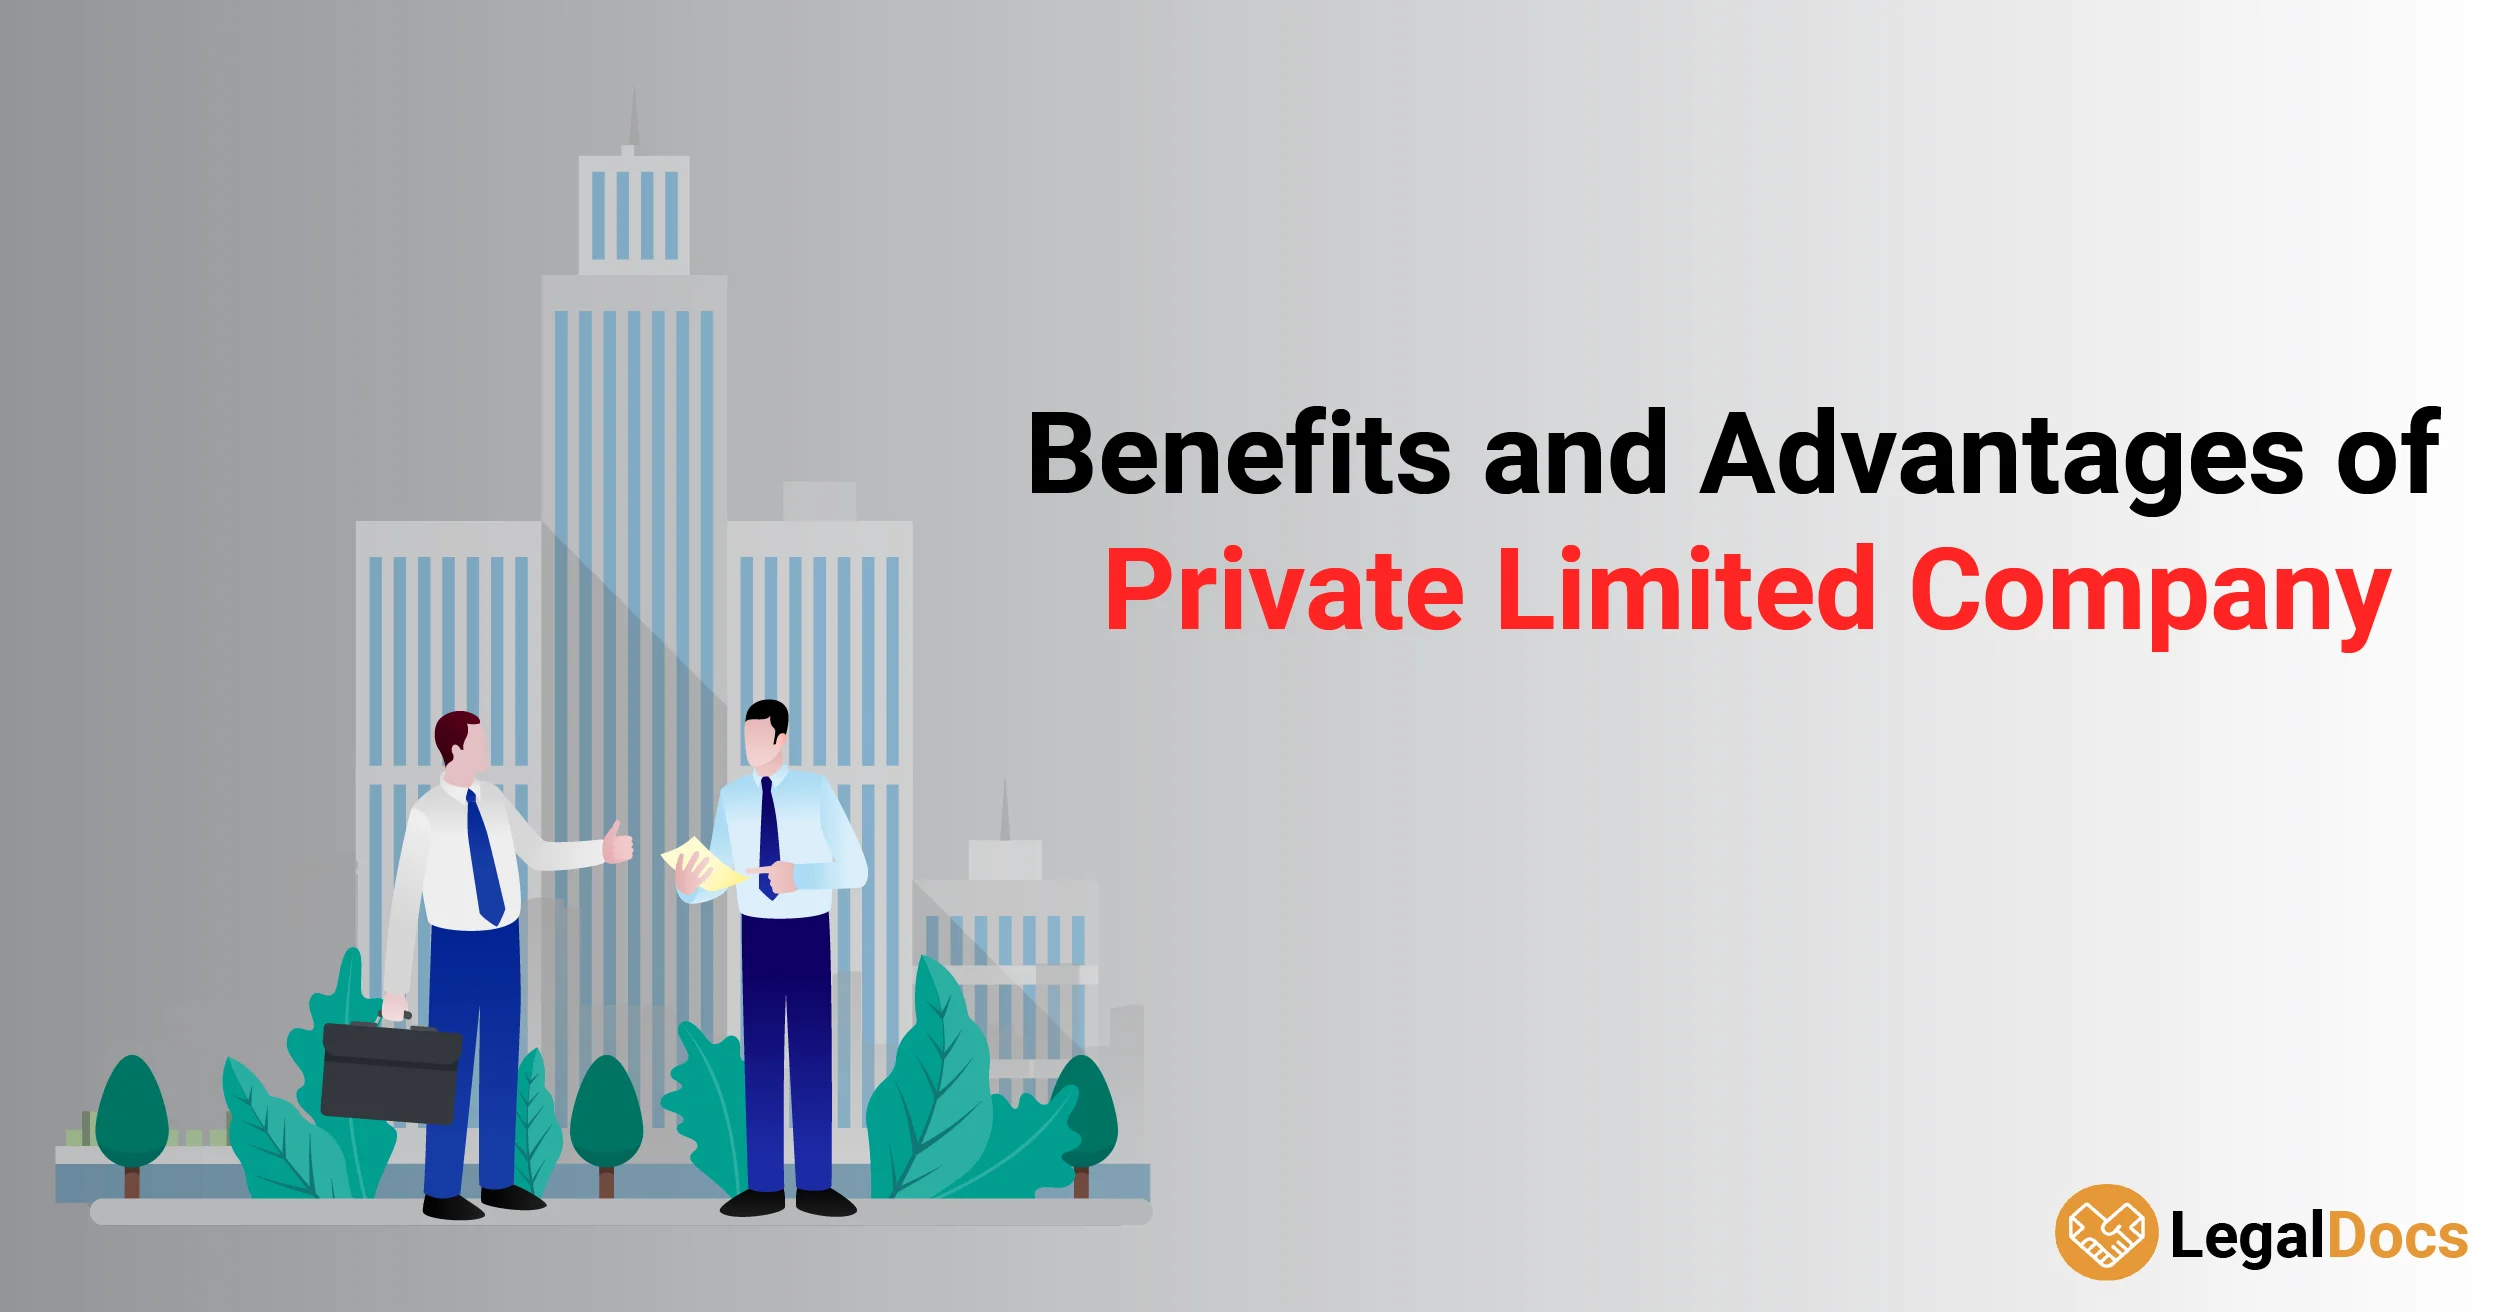 Benefits and Advantages of Private Limited Company - LegalDocs